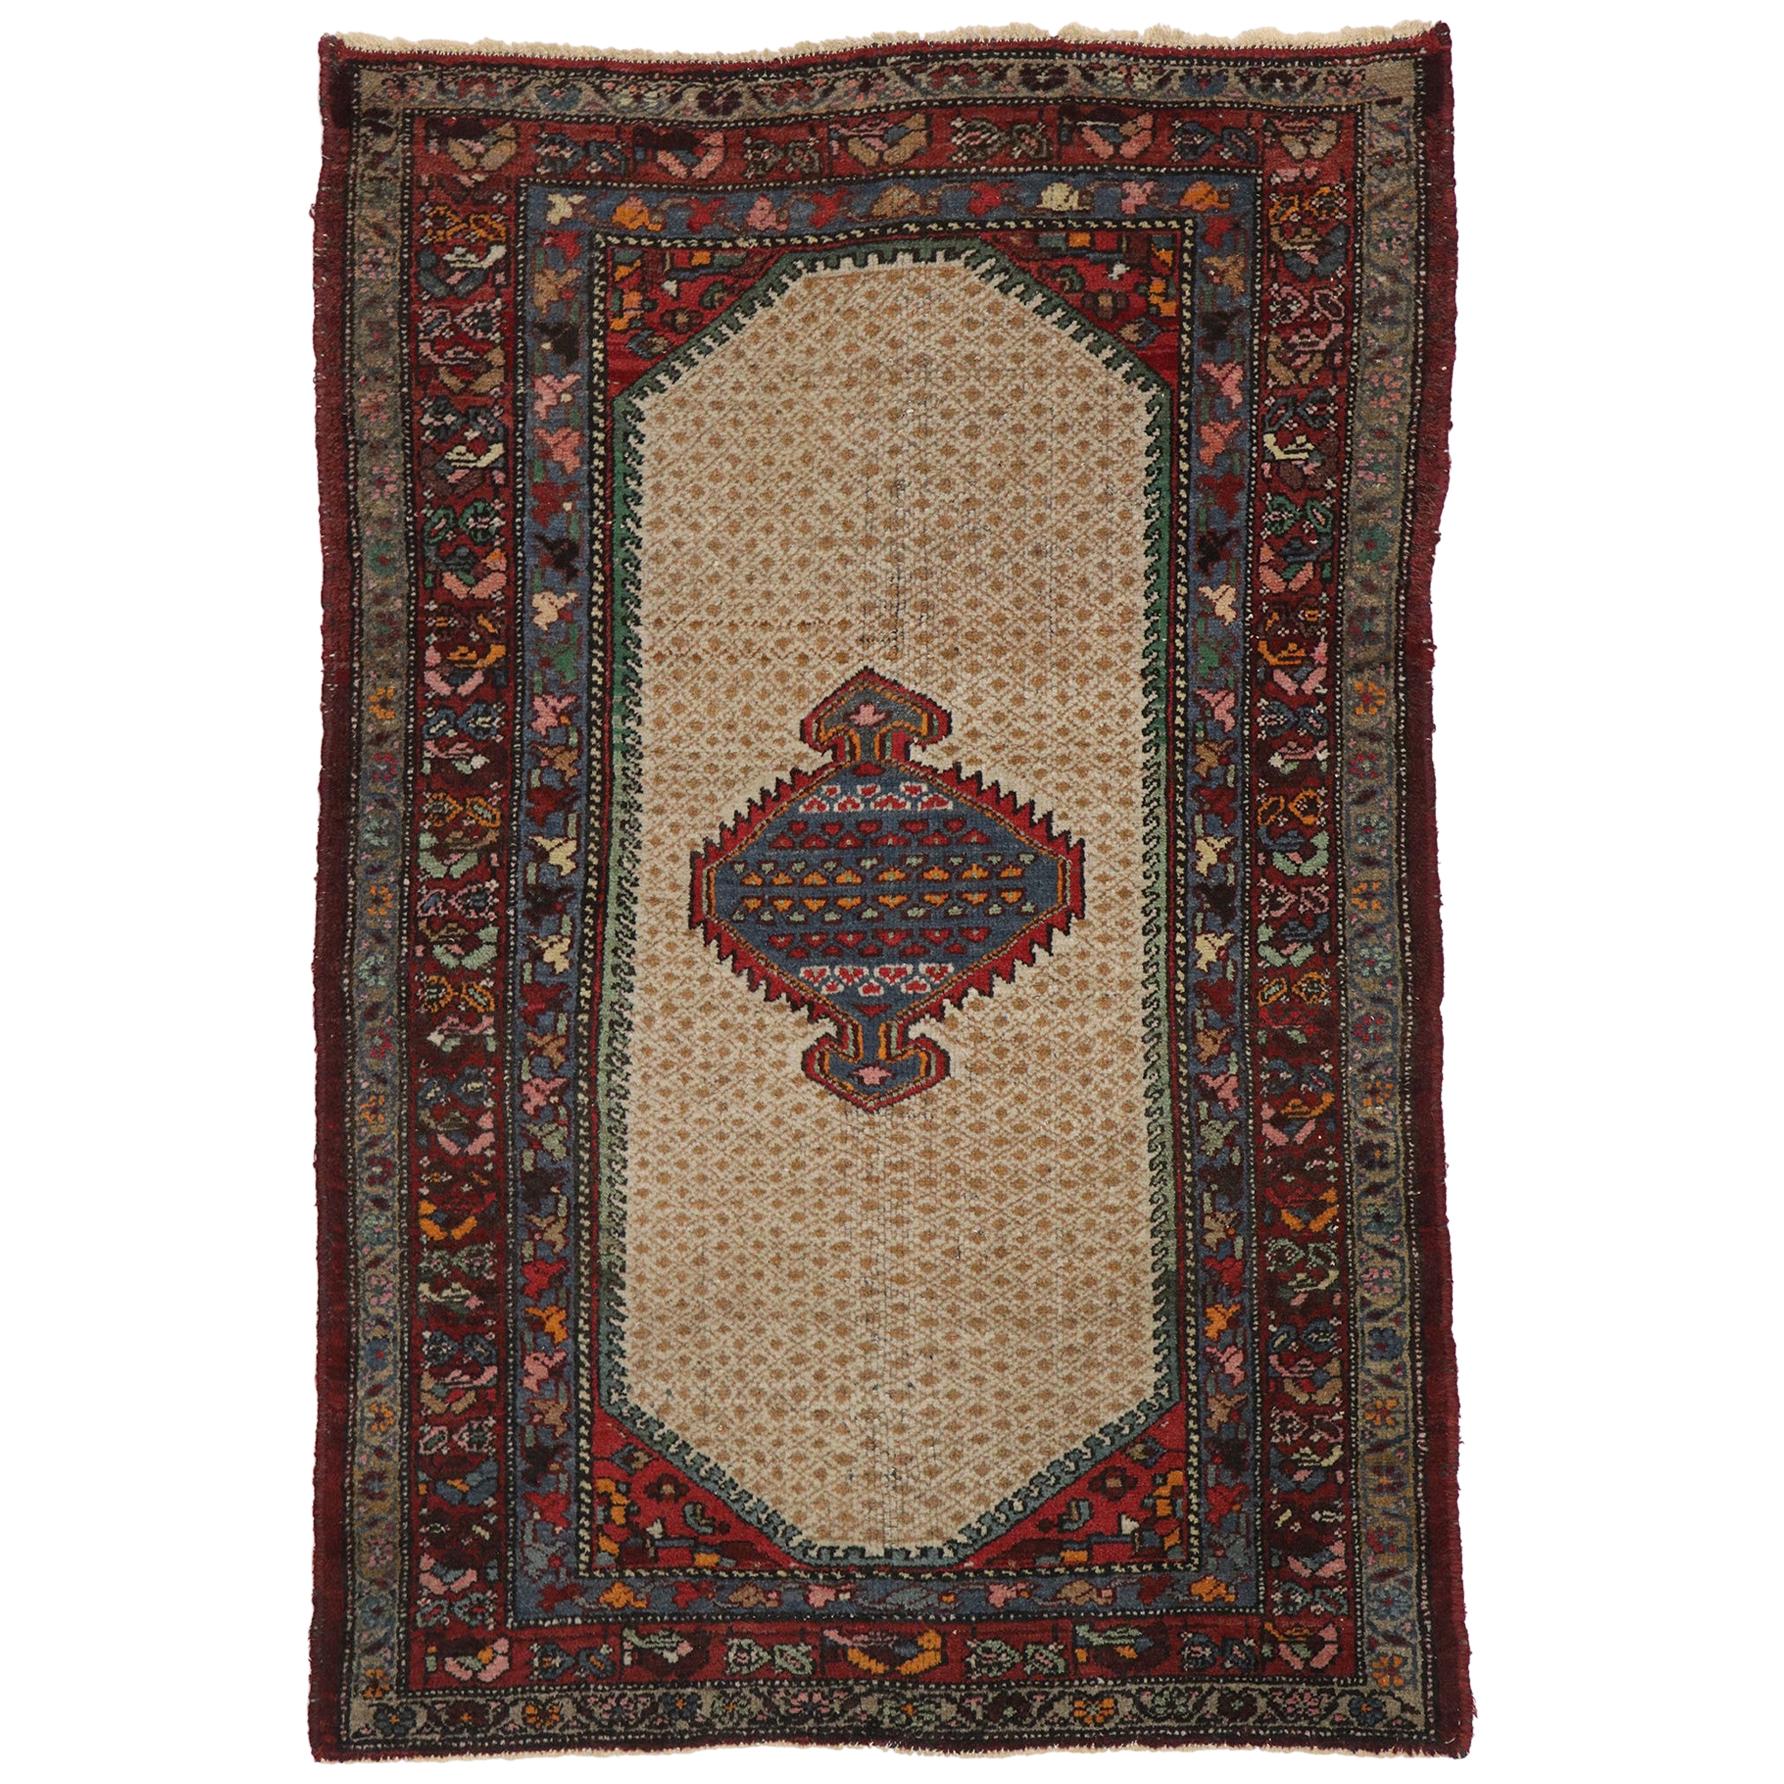 Antique Persian Hamadan Rug with Arts & Crafts Style